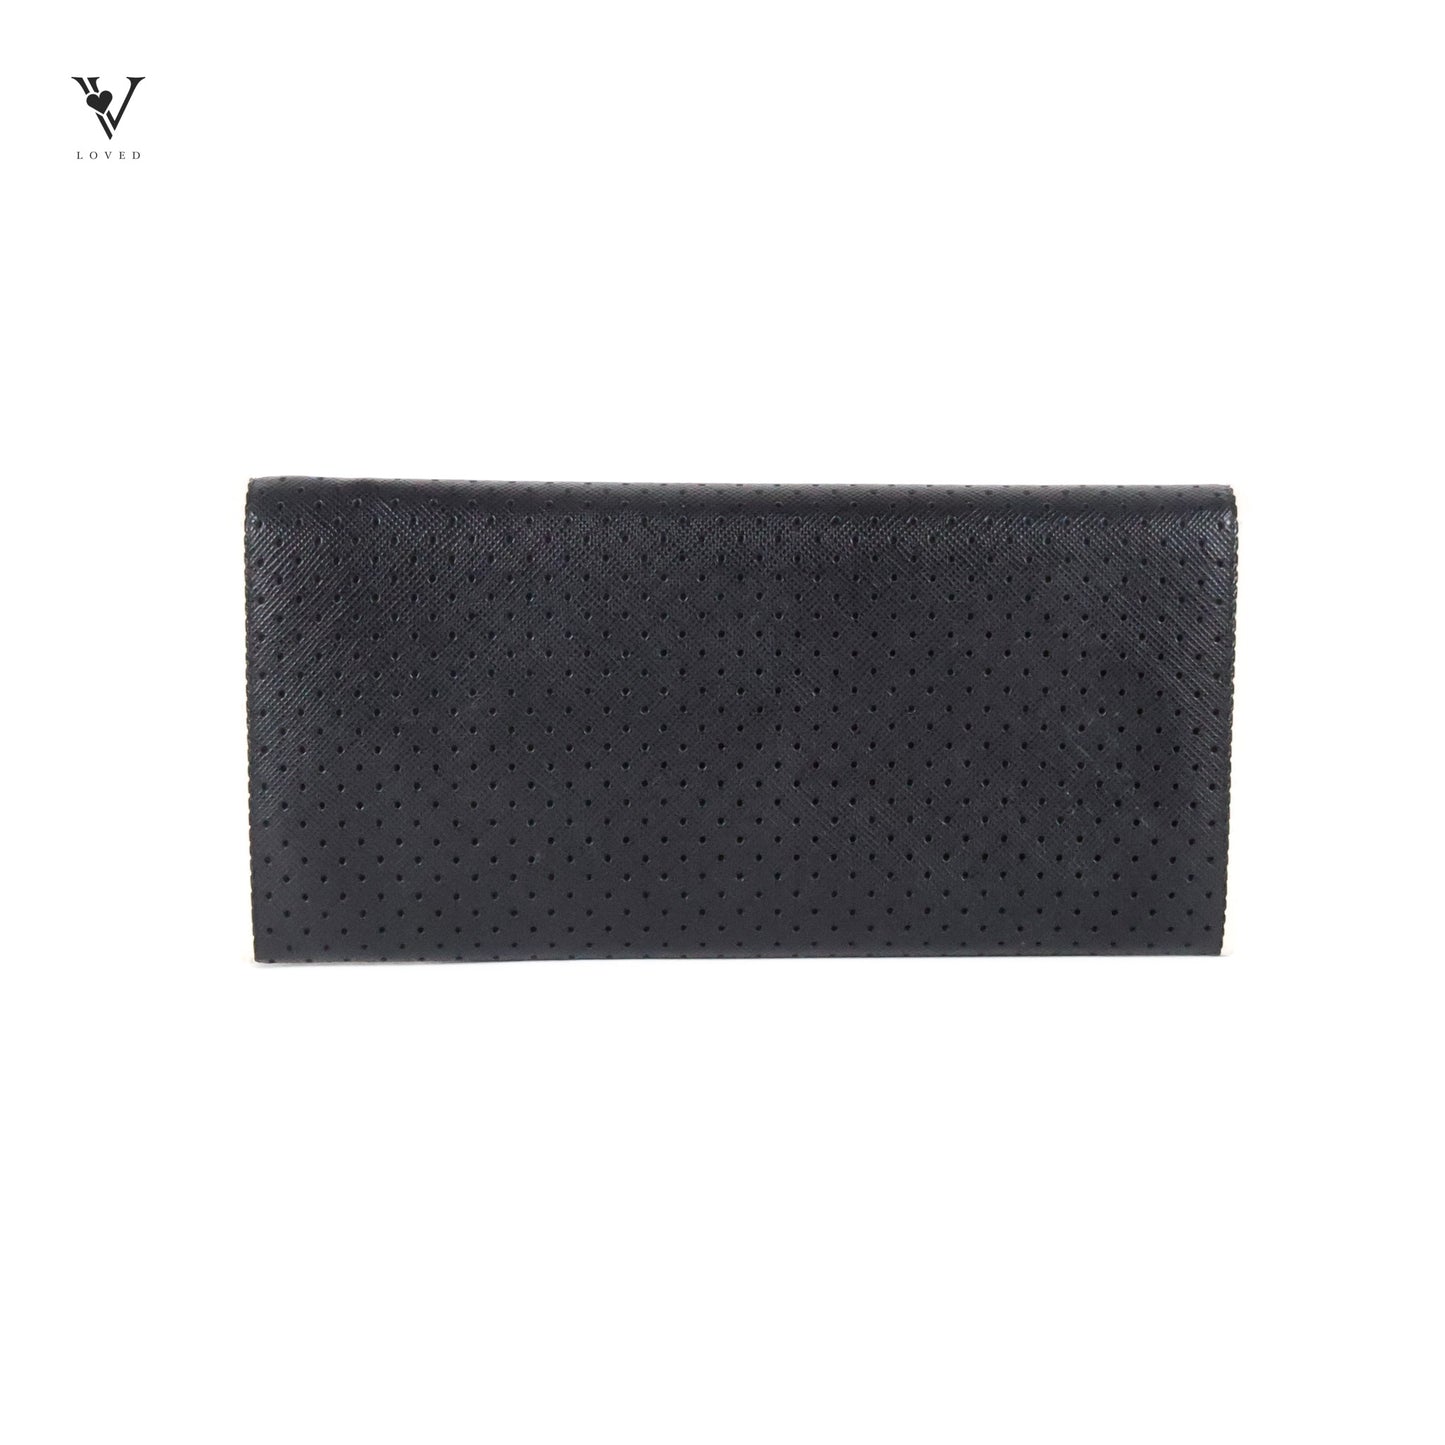 Perforated Saffiano Leather Flap Continental Wallet